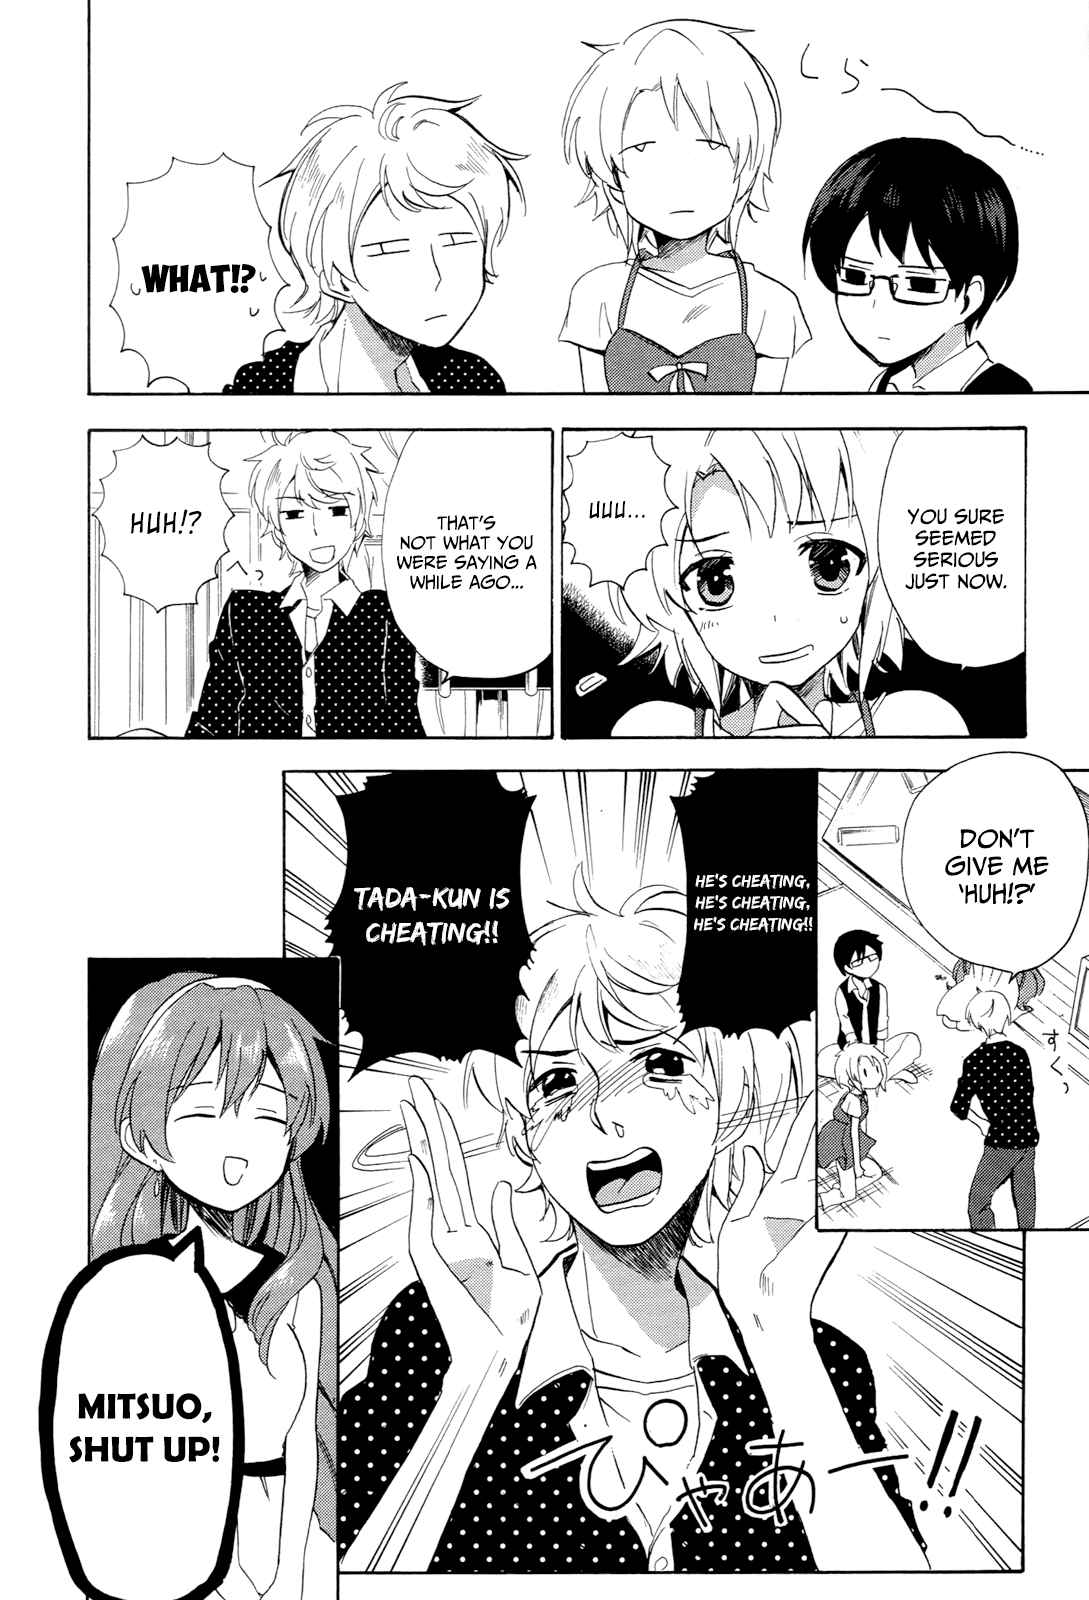 Golden Time Vol. 6 Ch. 29 I've Taken Out the Thorns